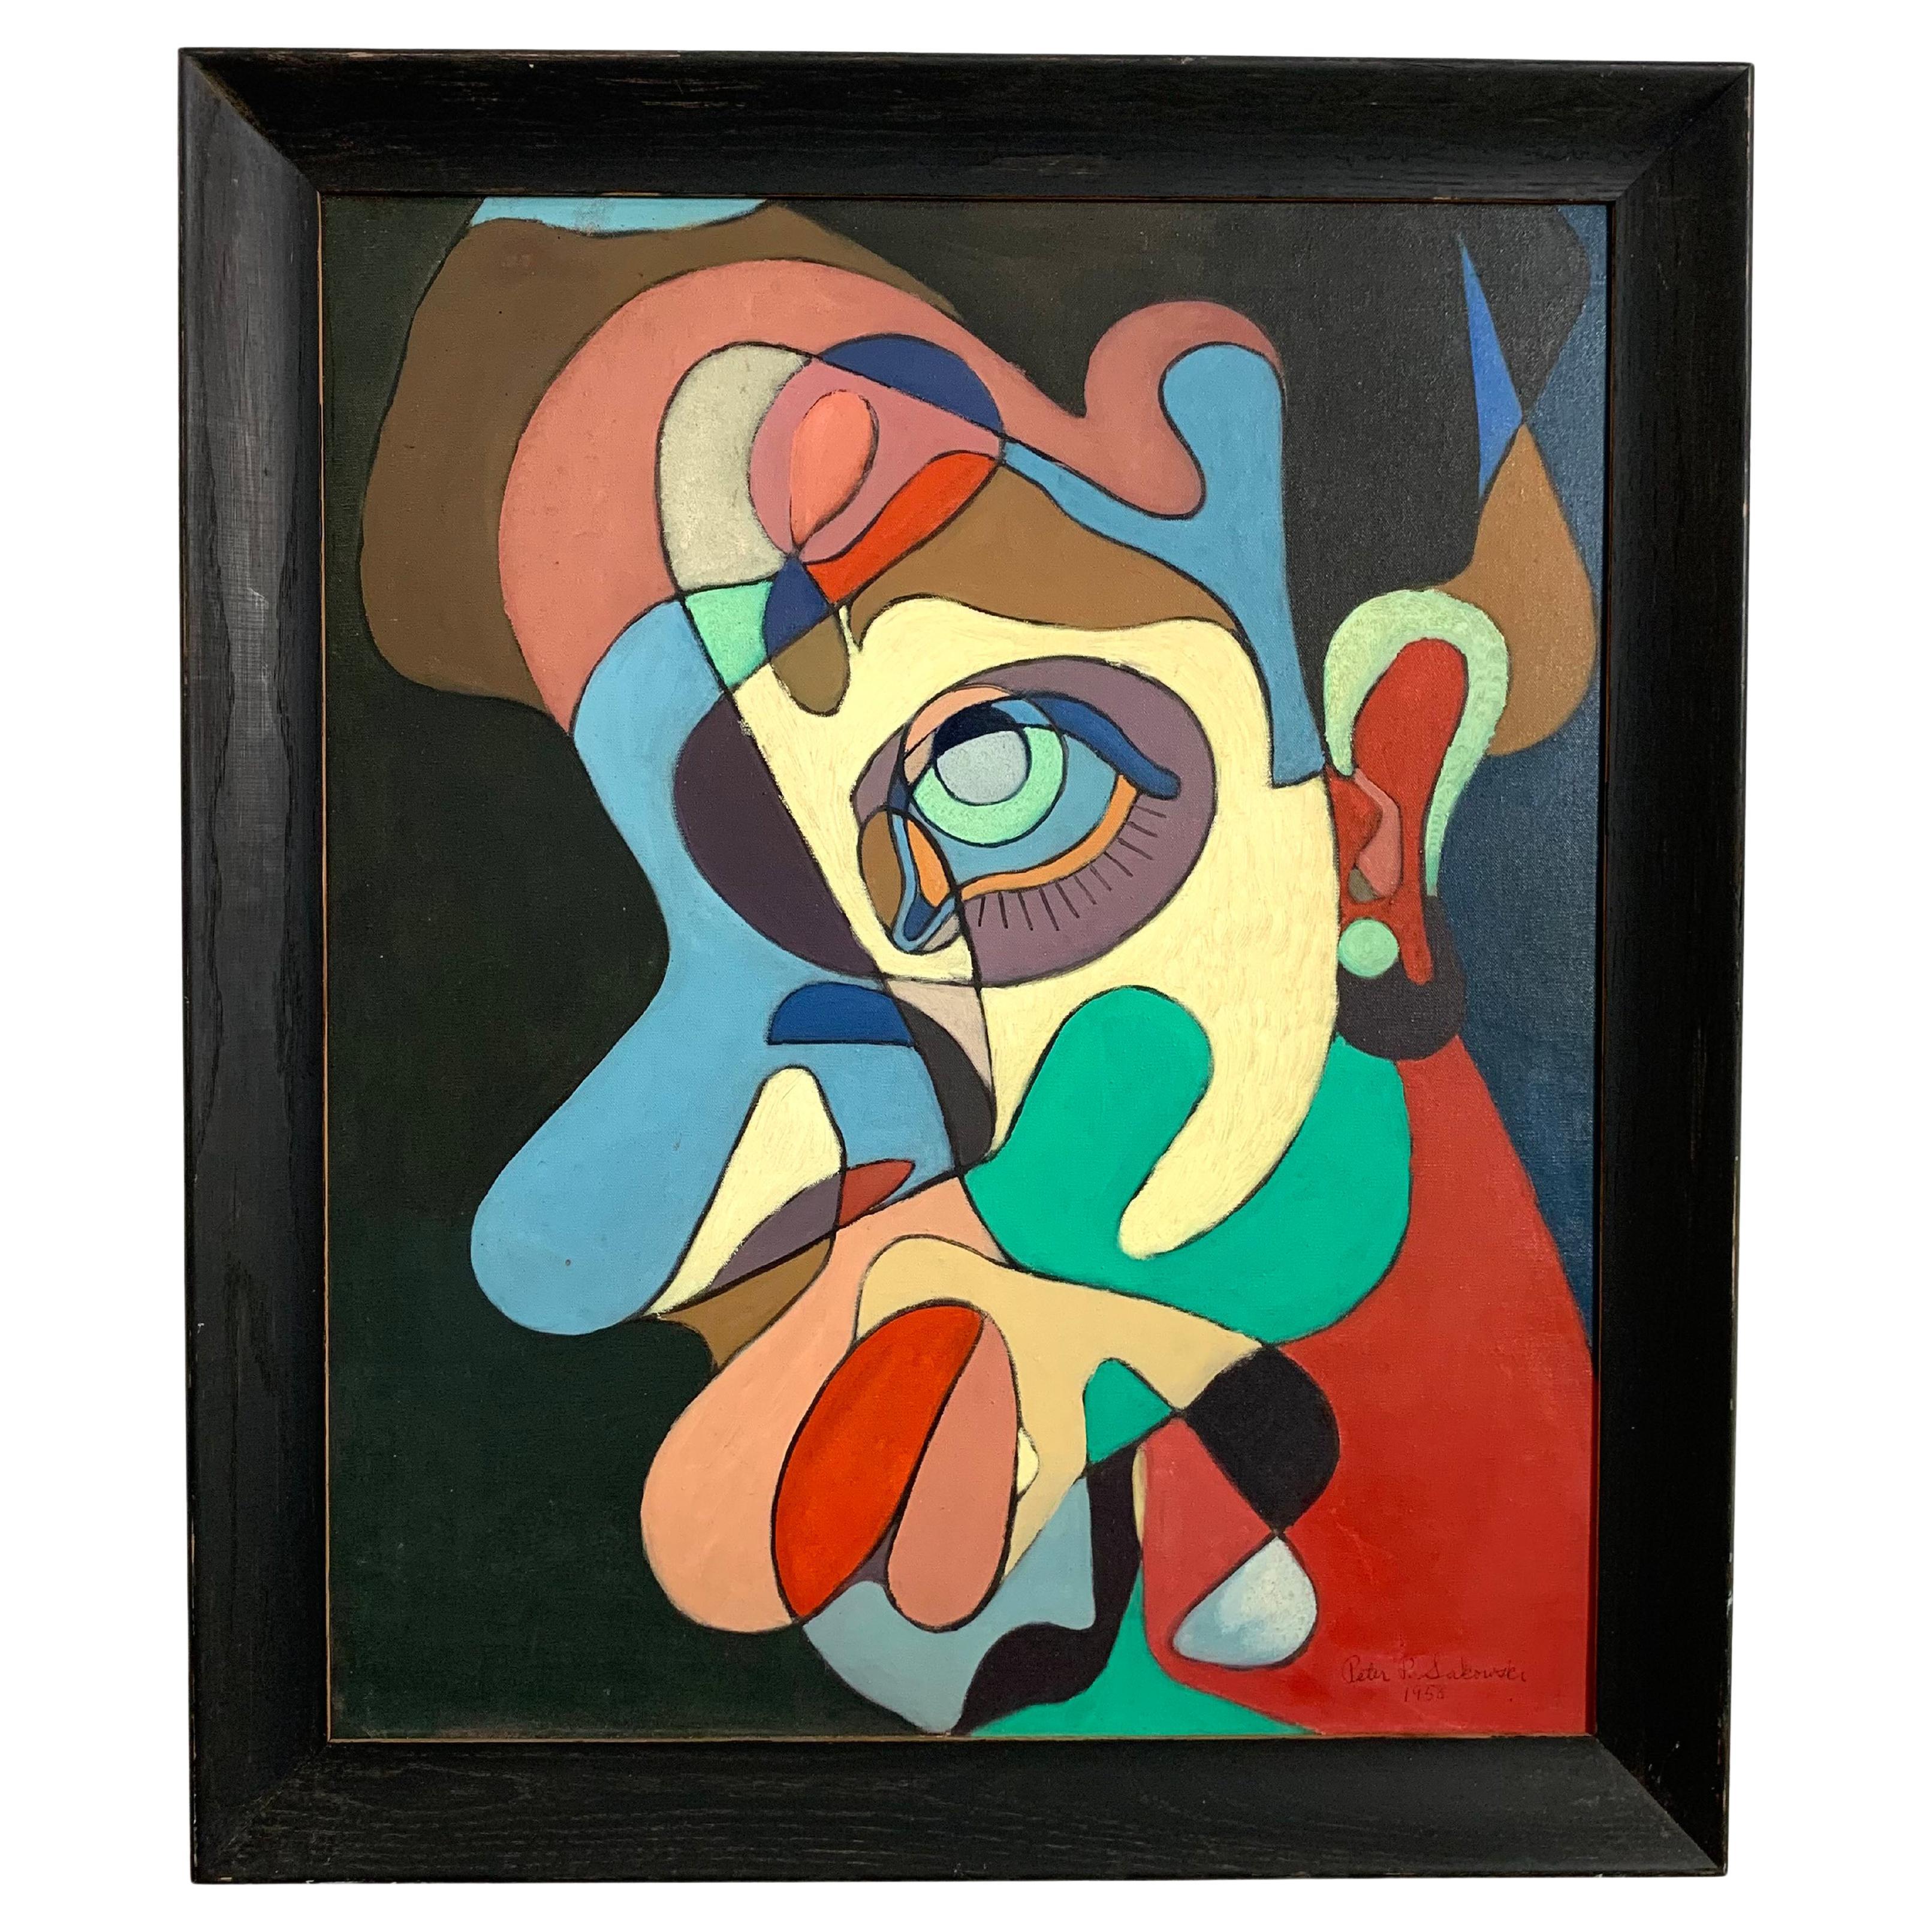 Modernist Cubist Painting Titled "Philosopher" Dated 1958 by Peter Paul Sakowski